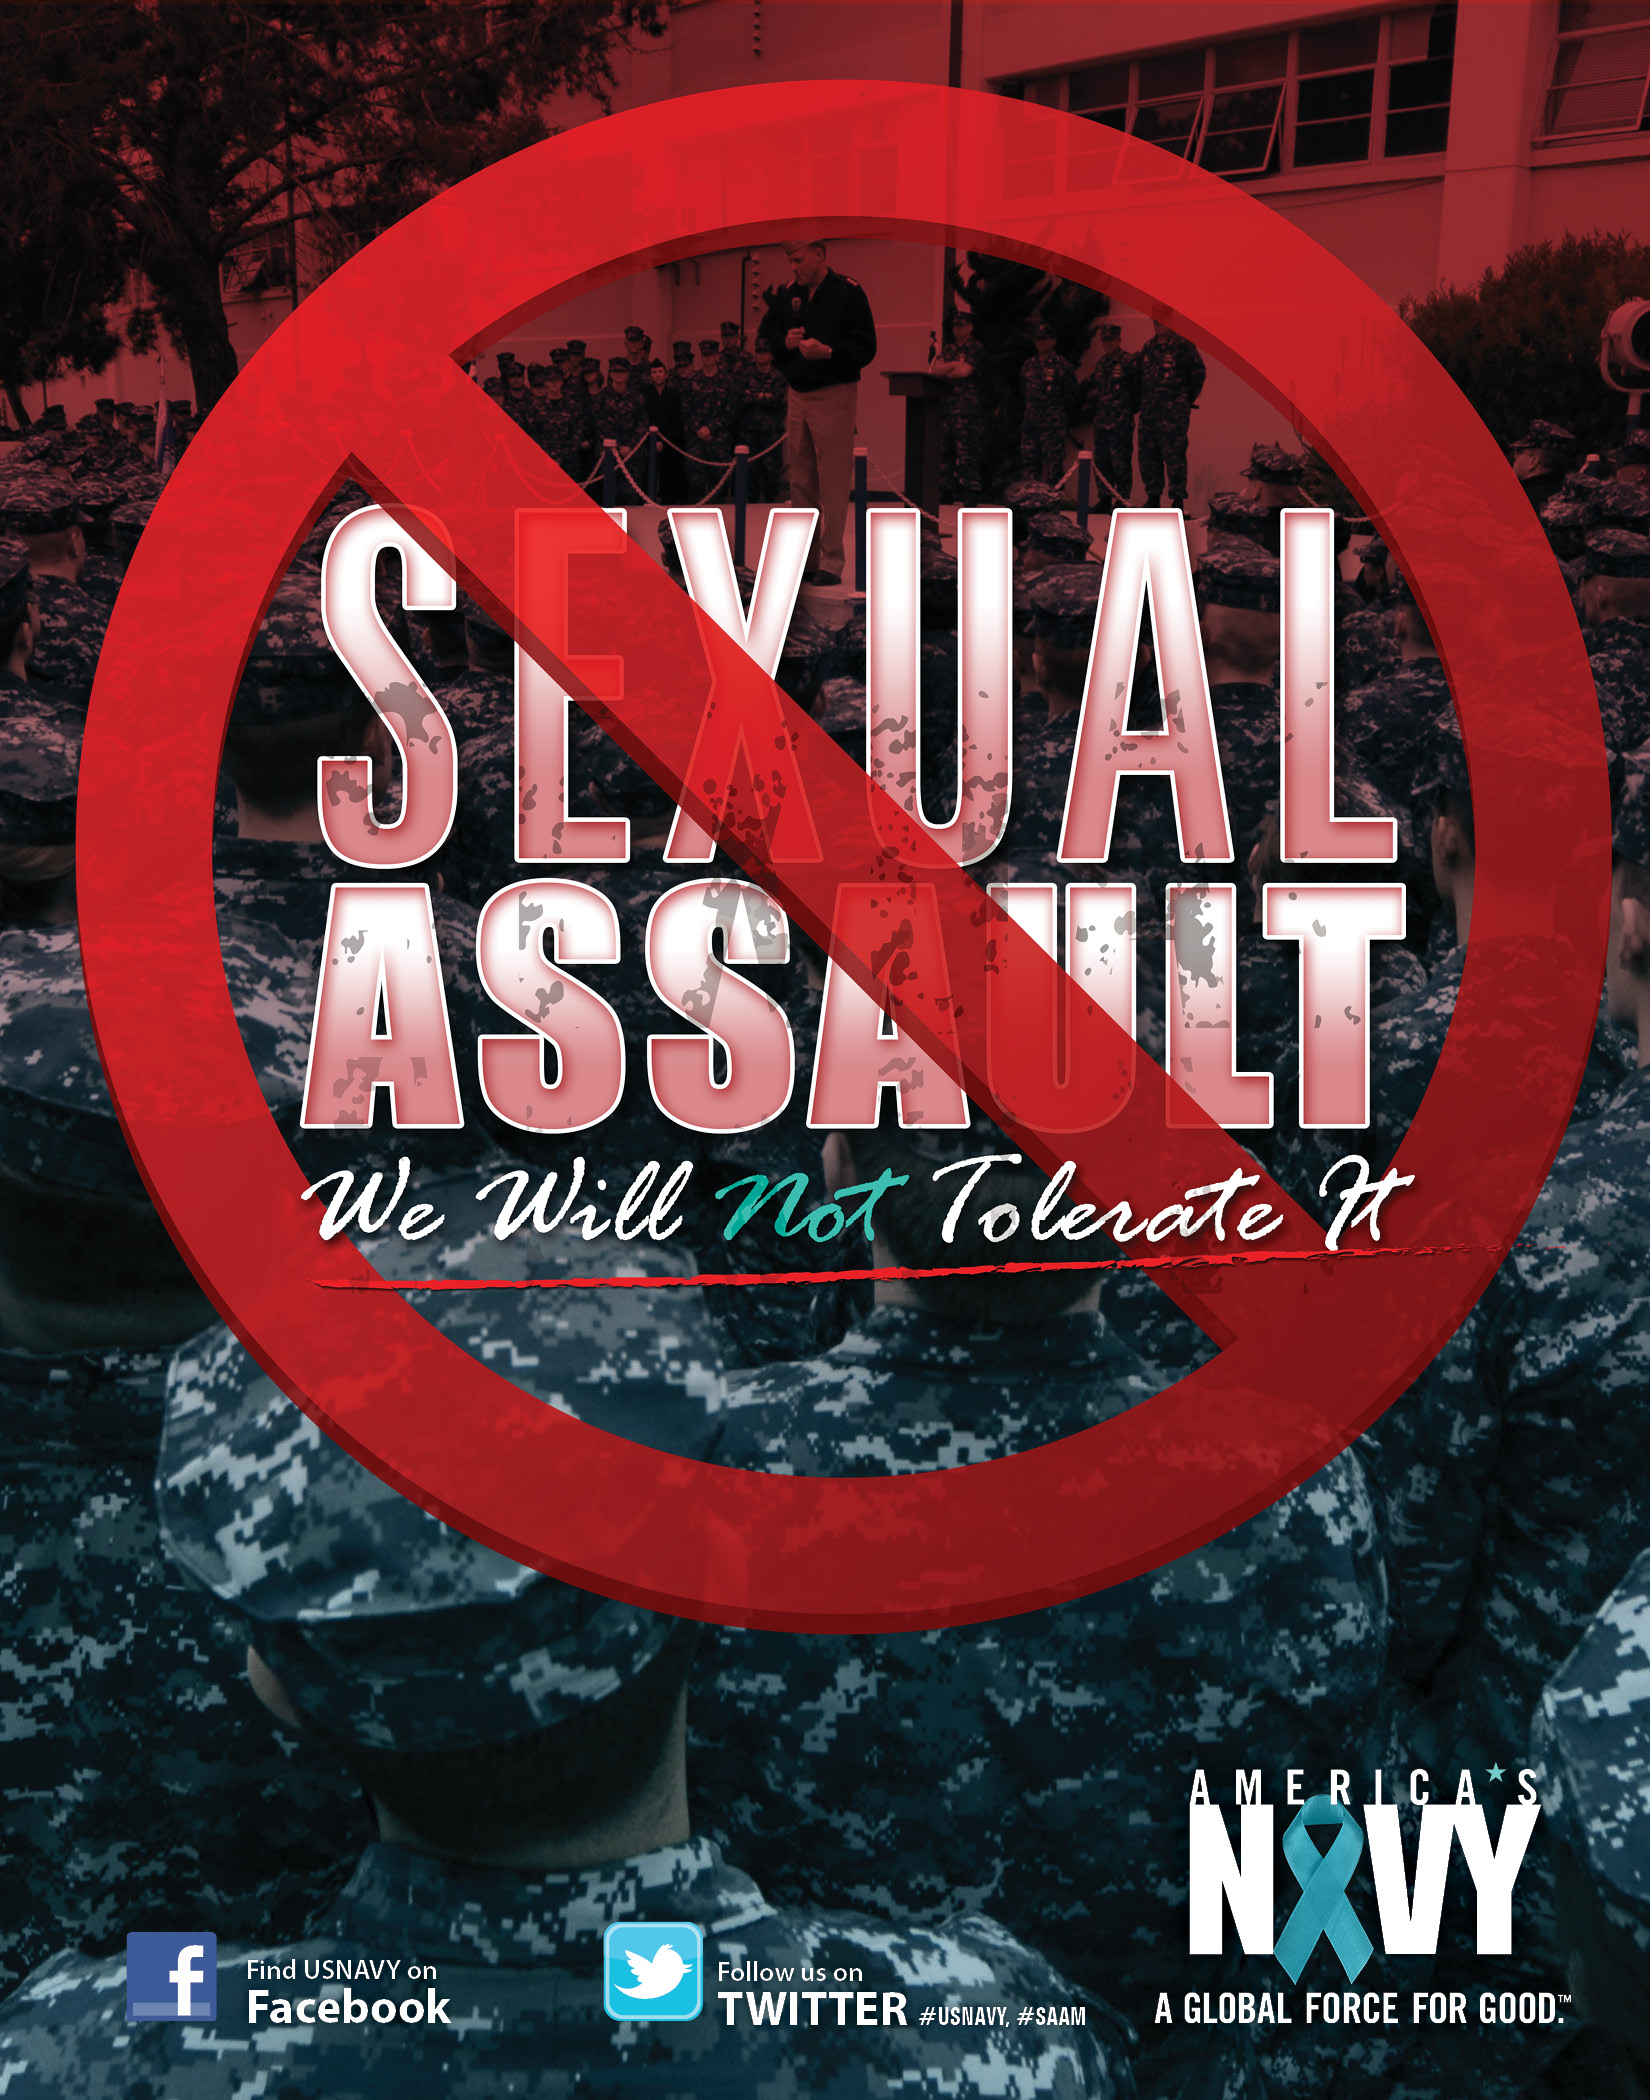 120409-N-ZZ999-004
WASHINGTON (April 11, 2012) An informational poster about sexual assault awareness month. Throughout the month of April, commands are encouraged to organize activities to raise awareness of sexual assault using the theme, Hurts One, Affects All. Prevention of Sexual Assault is Everyones Duty. Join the conversation on social media and help raise awareness using #SAAM. (U.S. Navy photo illustration by Leslie Paxton/Released)